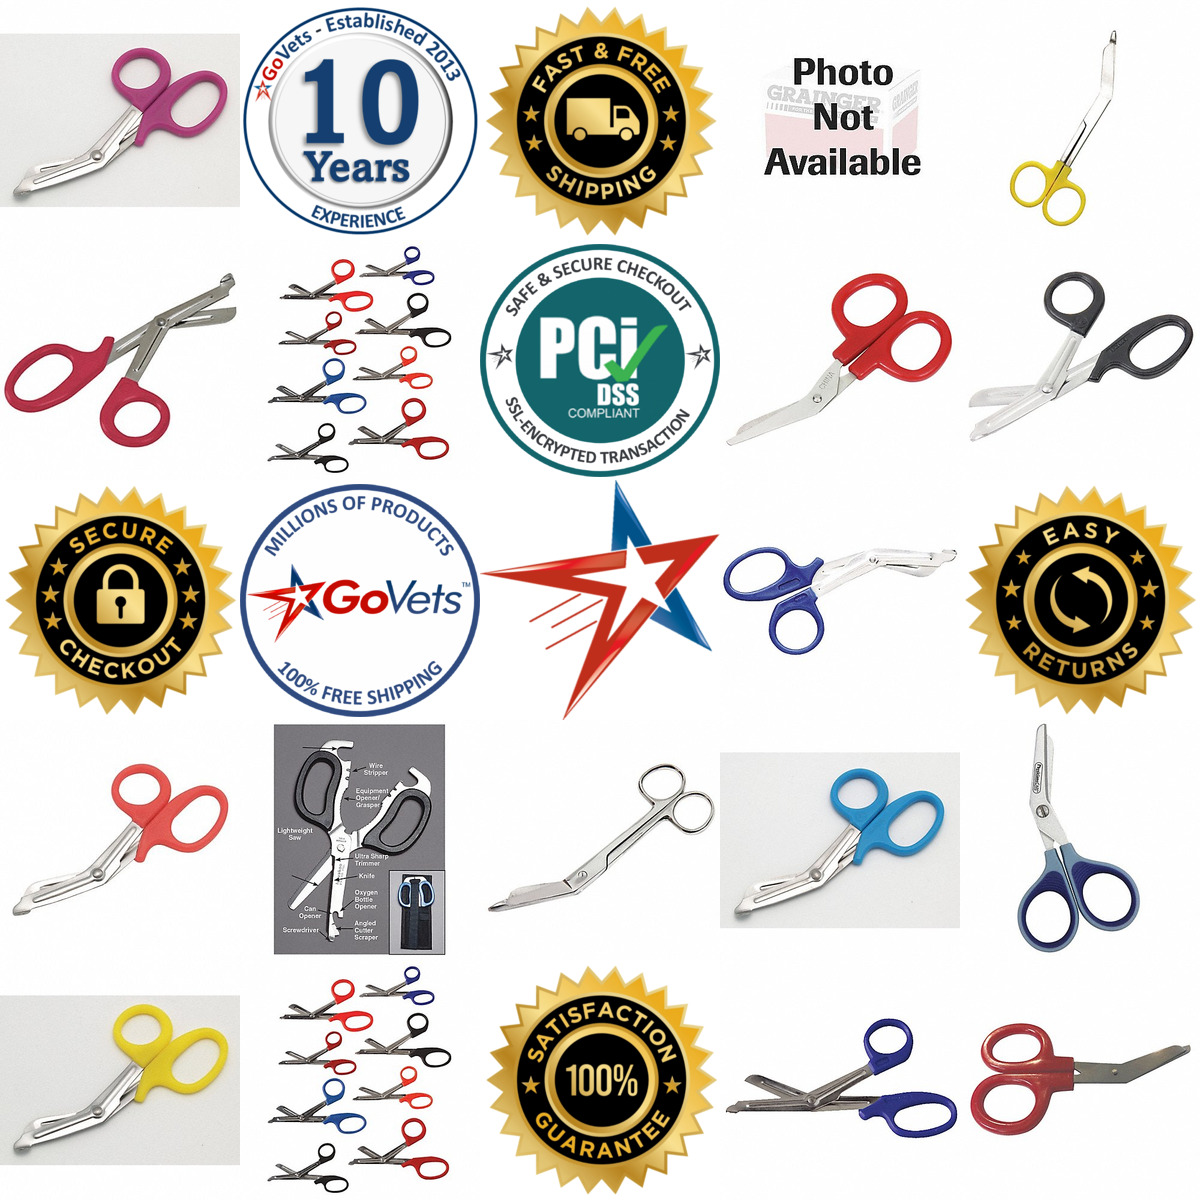 A selection of Medical Scissors and Shears products on GoVets